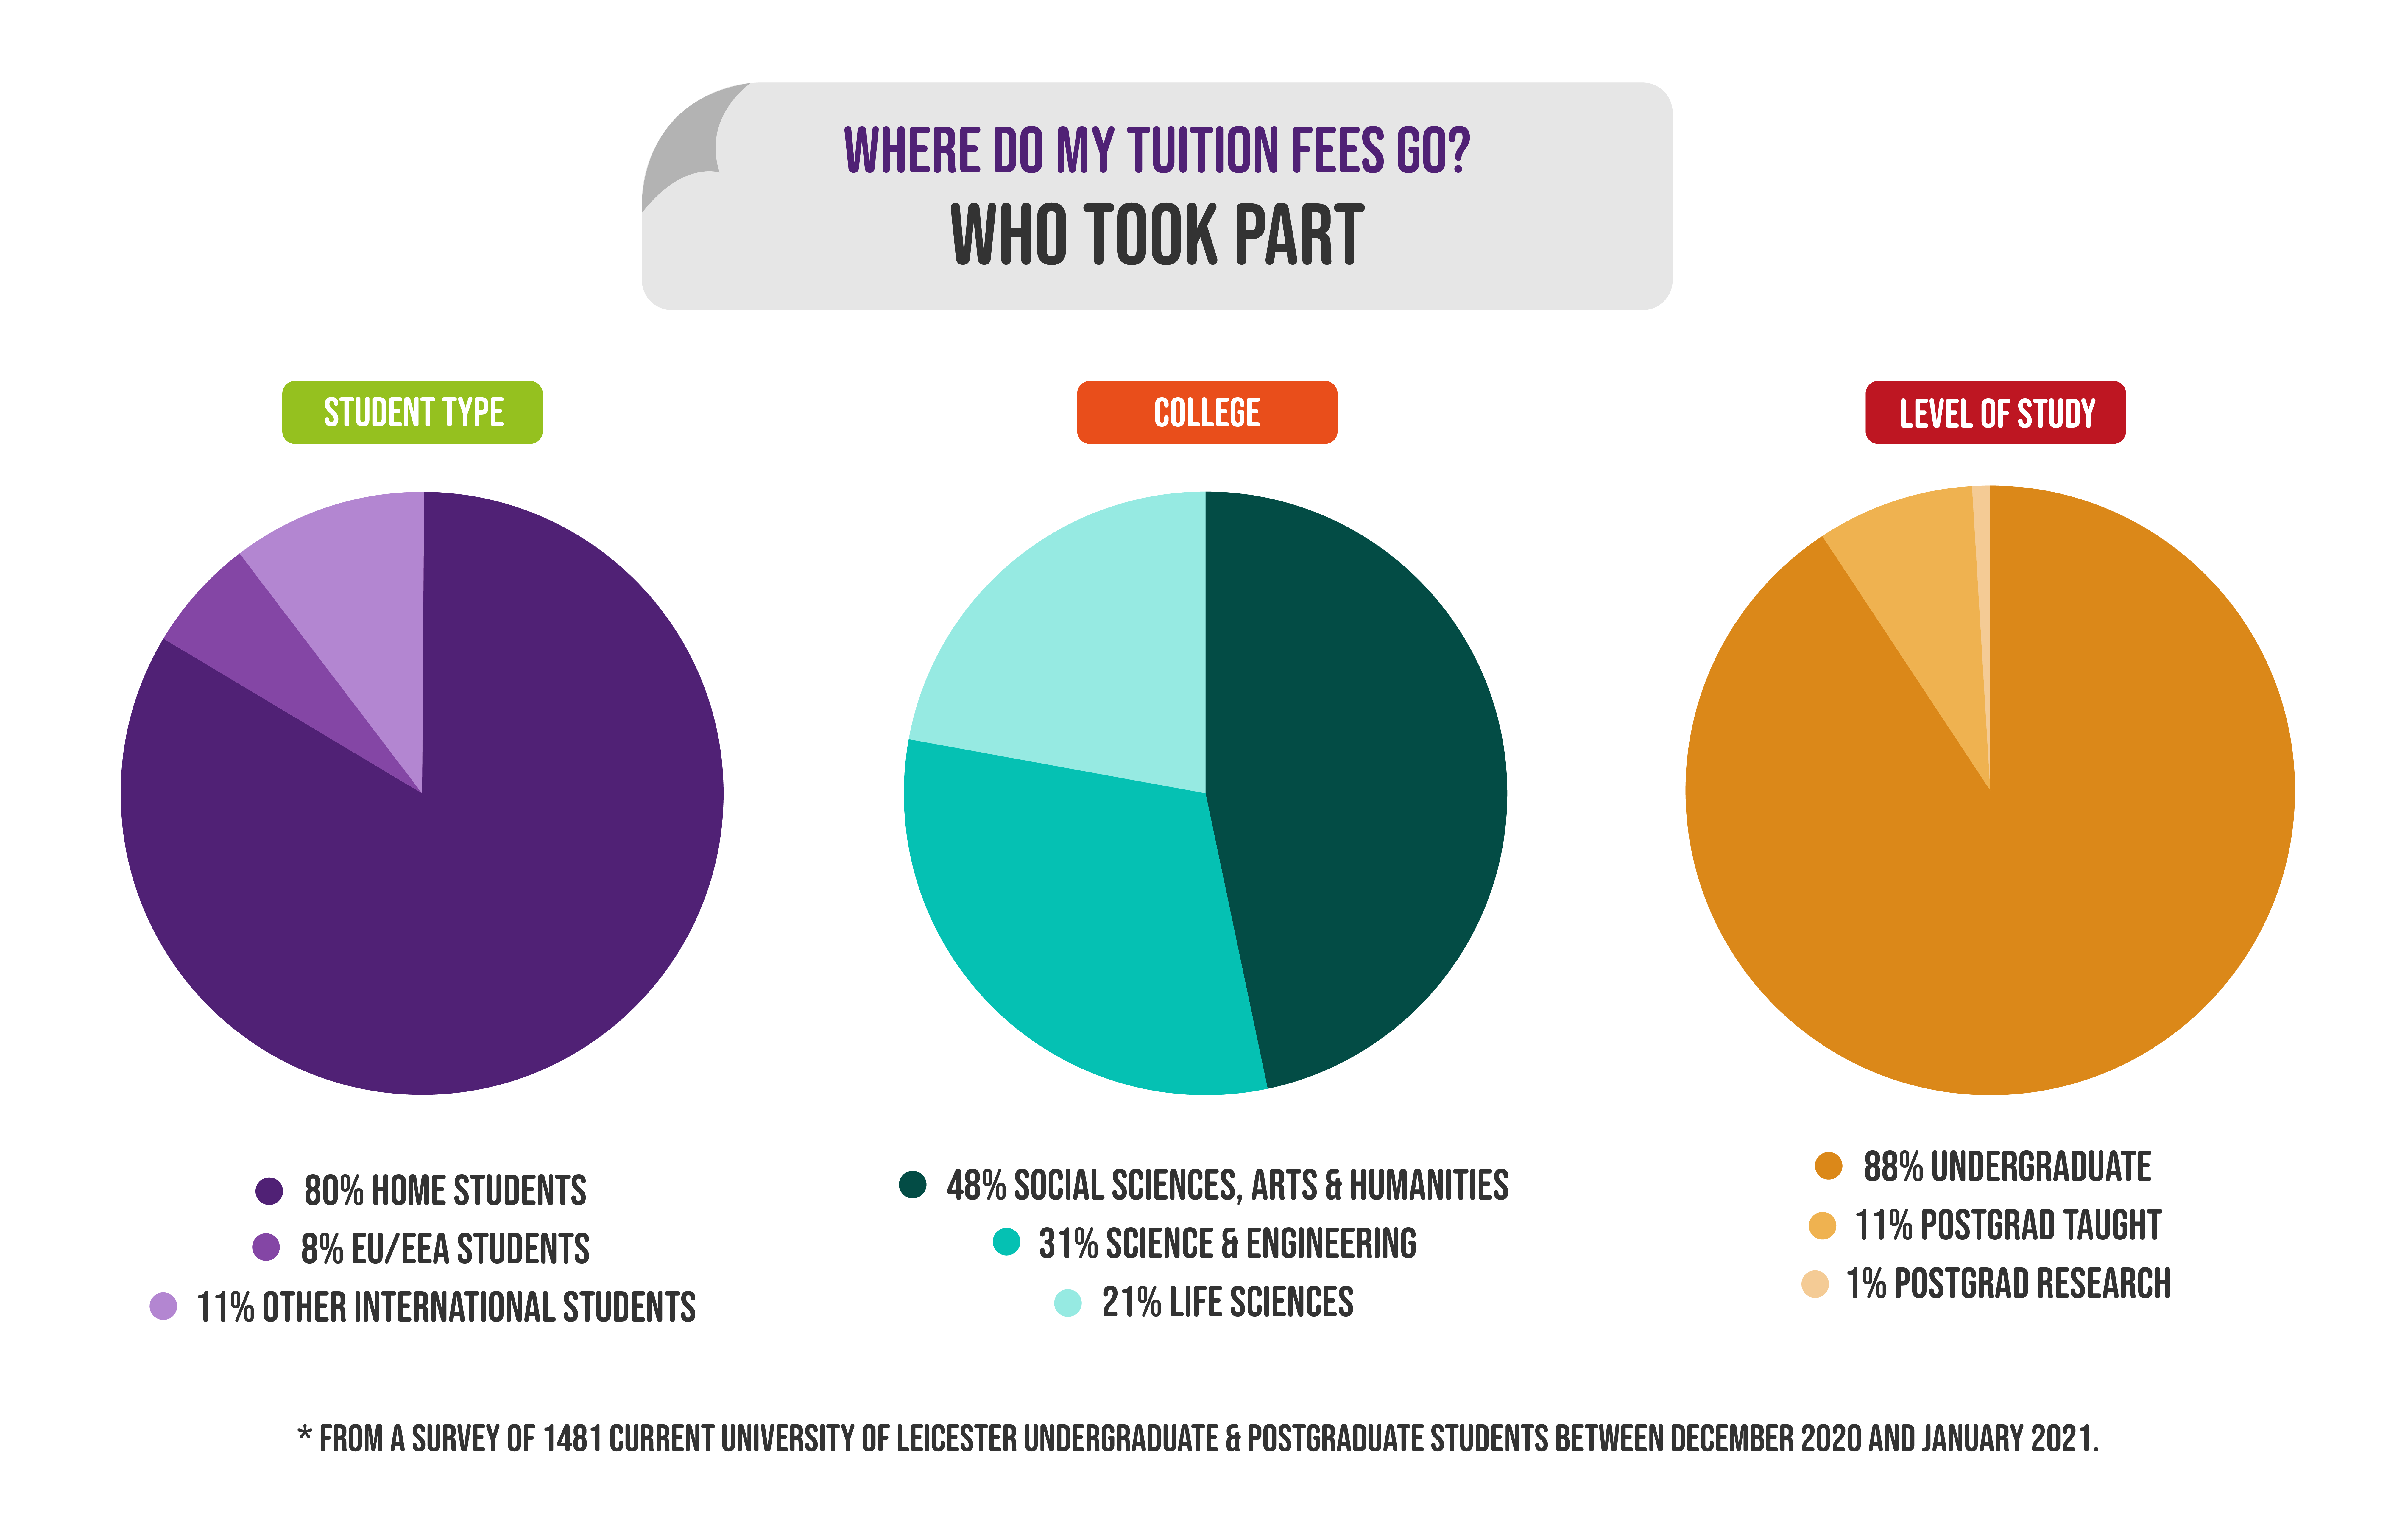 Pie chart showing who took part in the tuition fees survey. Student type was 80% home/domestic students, 8% EEA/EU, 11% other international. Colleges students were from: 48% social sciences, arts & hums, 31% science and engineering, and 21% life sciences. Level of study was 88% undergraduate, 11% postgraduate taught, and 1% postgraduate research